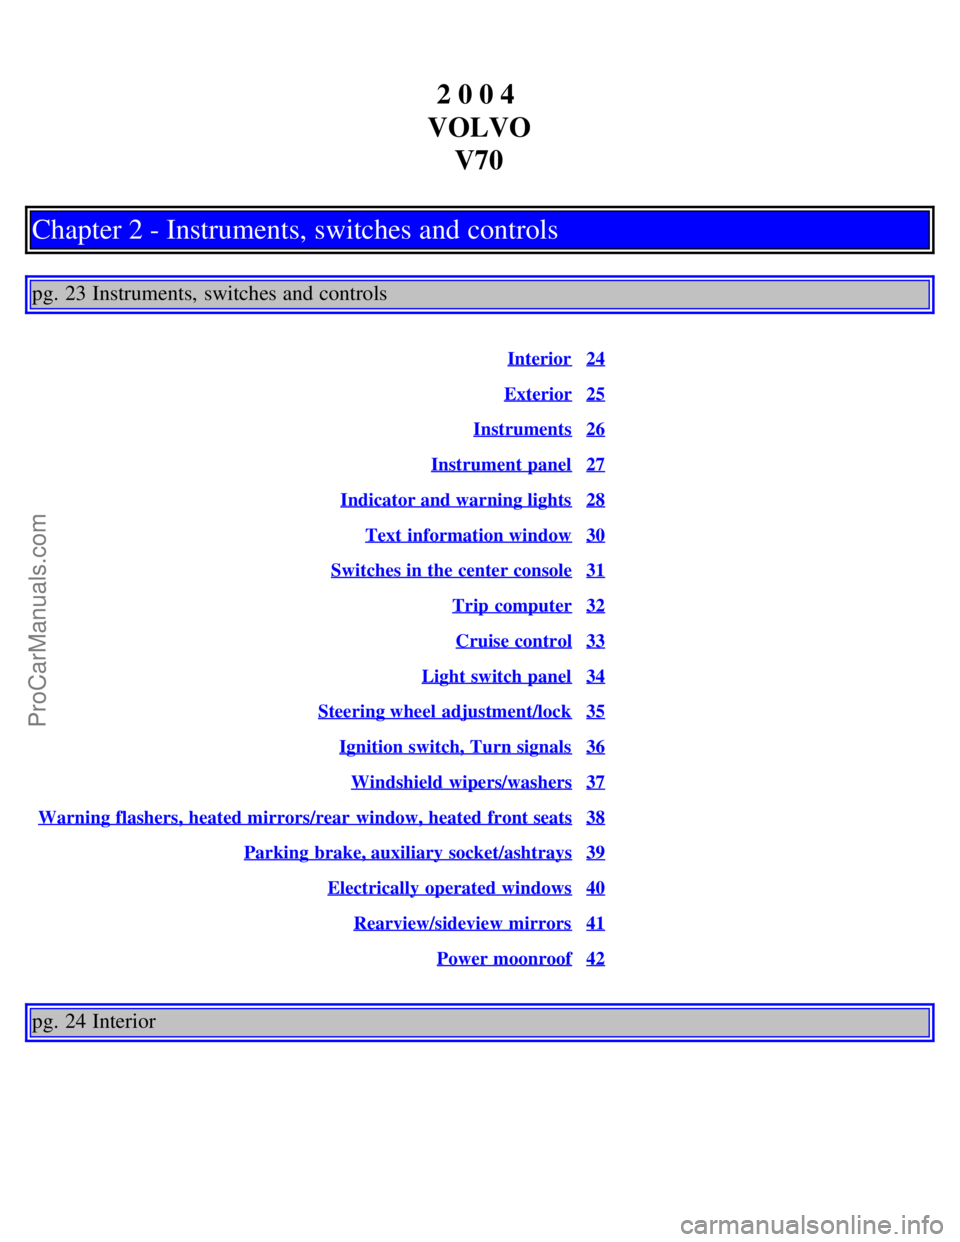 VOLVO V70 2004  Owners Manual 2 0 0 4 
VOLVO V70
Chapter 2 - Instruments, switches and controls
pg. 23 Instruments, switches and controls
Interior24
Exterior25
Instruments26
Instrument panel27
Indicator and warning lights28
Text  